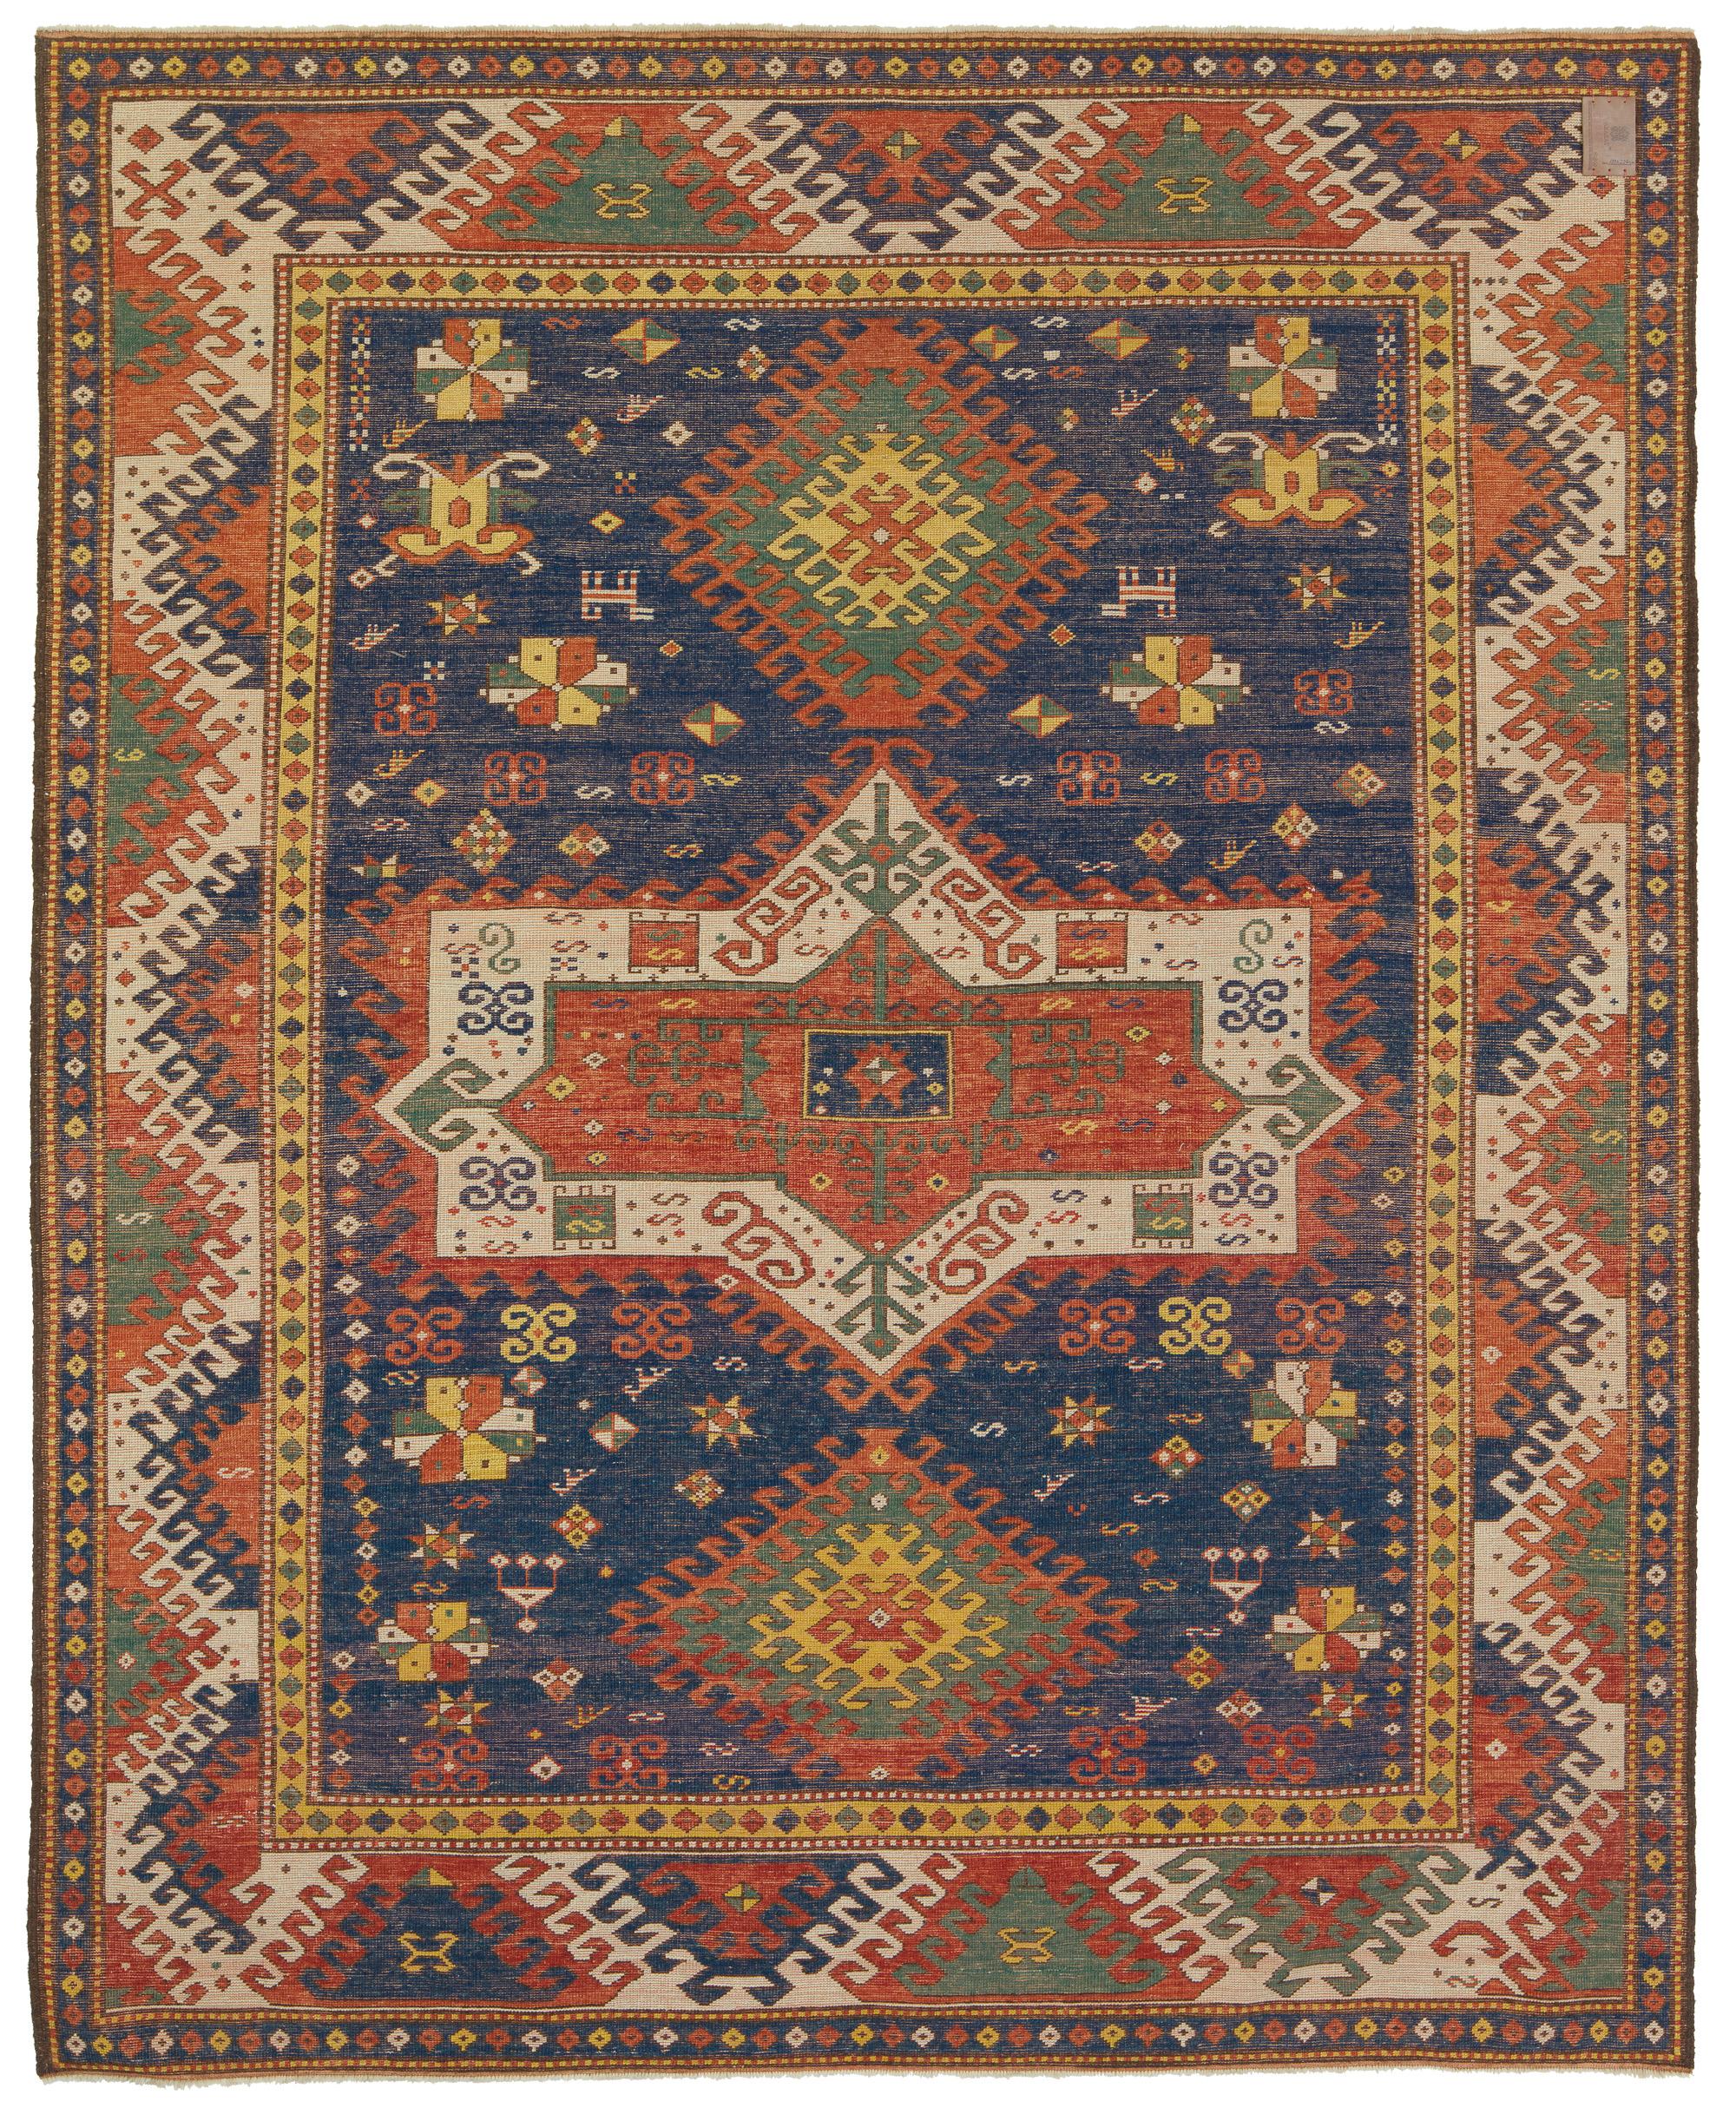 This is another Kazak example of the Fachralo a town north of Lori-Pambak and just southwest of Bordjalou, from the late 19th century, Caucasus area. It has given its name to a number of usually small, boldly designed, and brilliantly colored Kazak